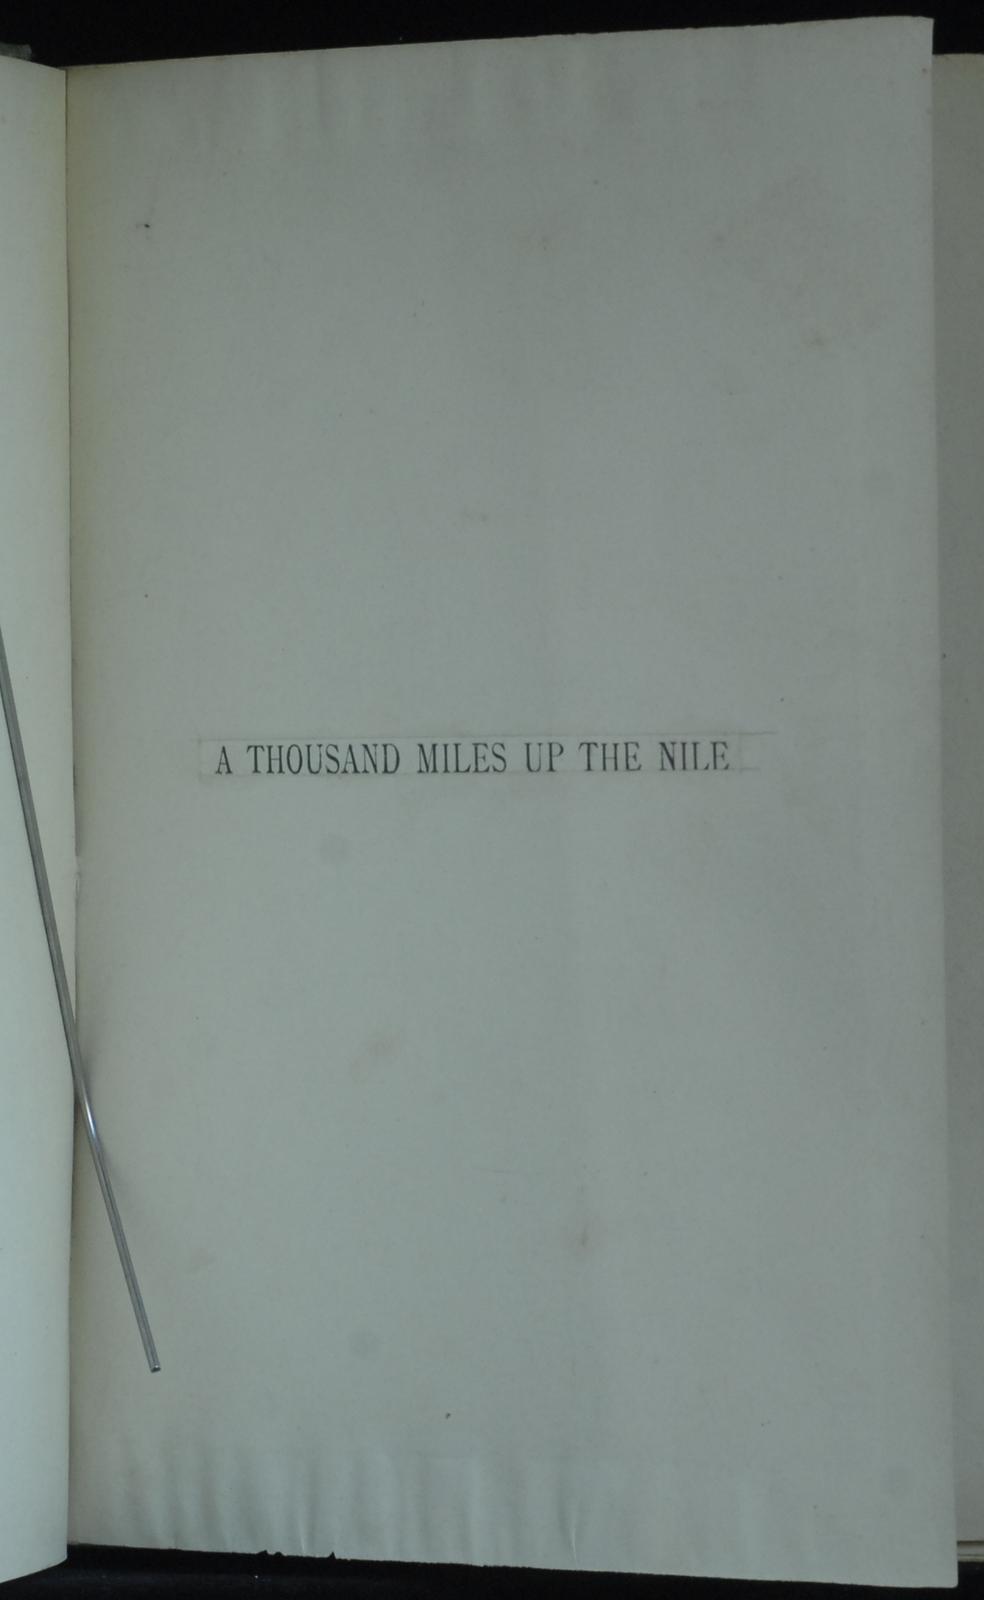 mbb007016d_-_Edwards_Amelia_Blanford_-_A_Thousand_Miles_Up_The_Nile_-_Contains_Illustrations.jpg